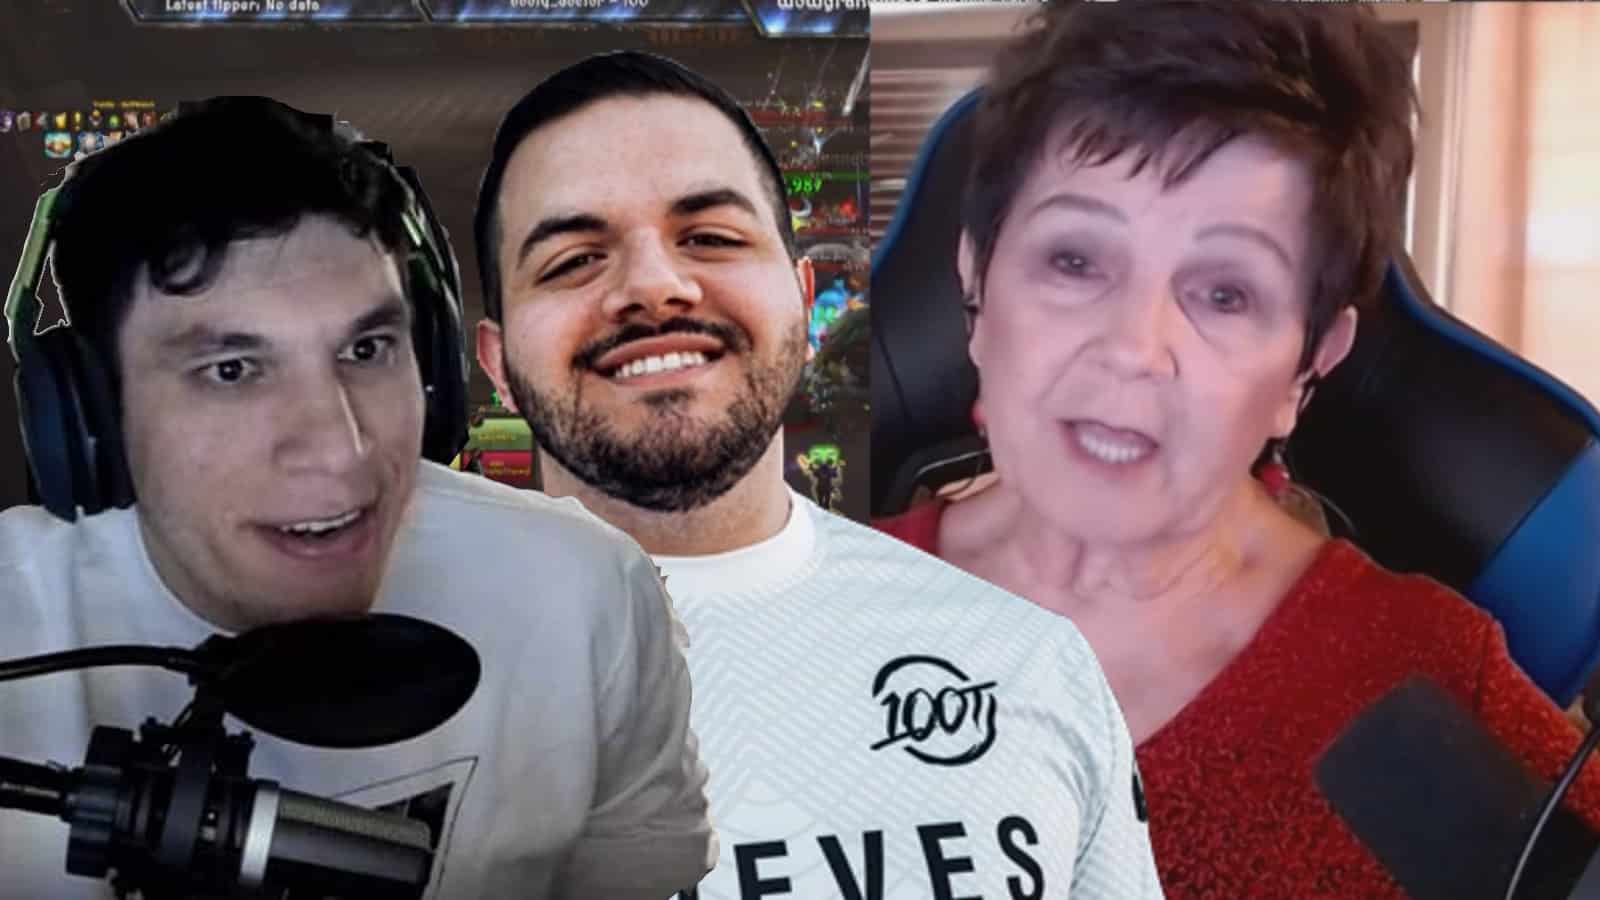 78-year-old Grandma Becomes Popular Video Game Streamer on Twitch